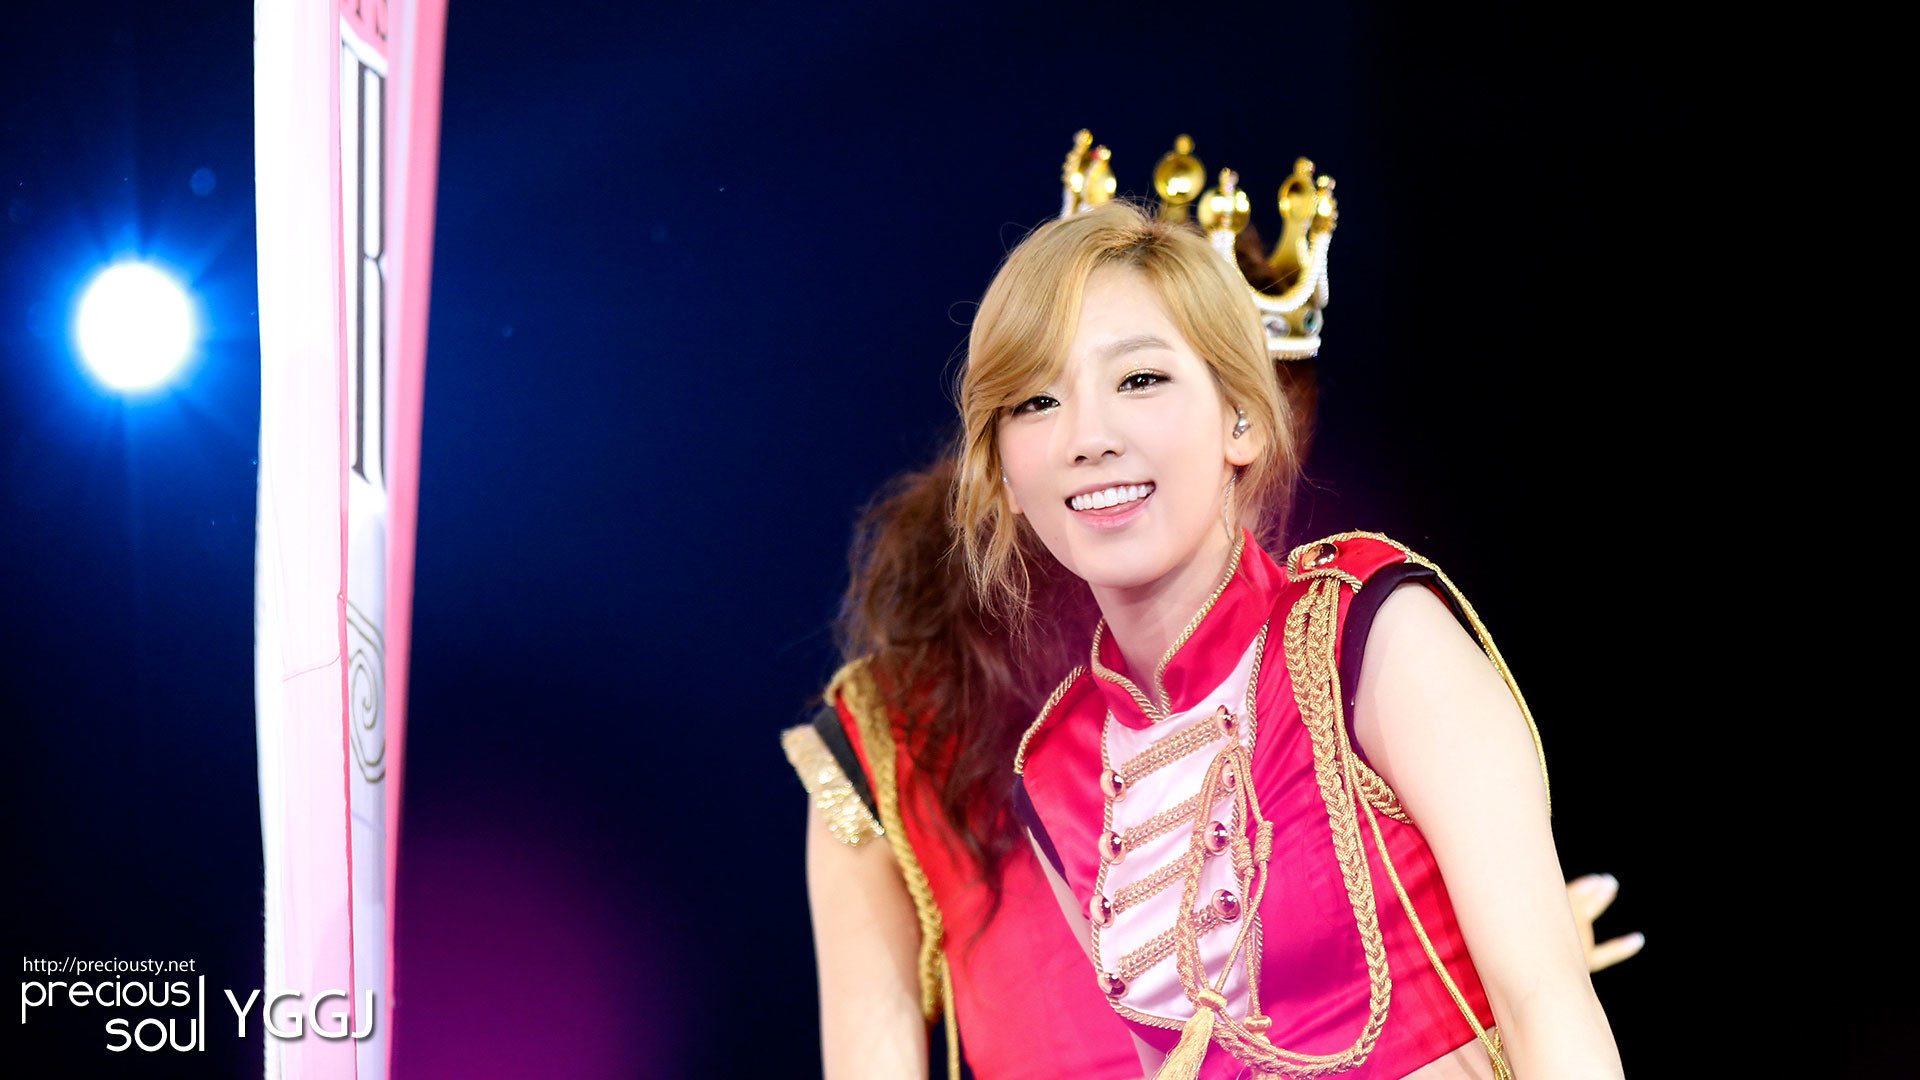 1920x1080 Taeyeon (SNSD) images TAEYEON HD wallpaper and background photos .